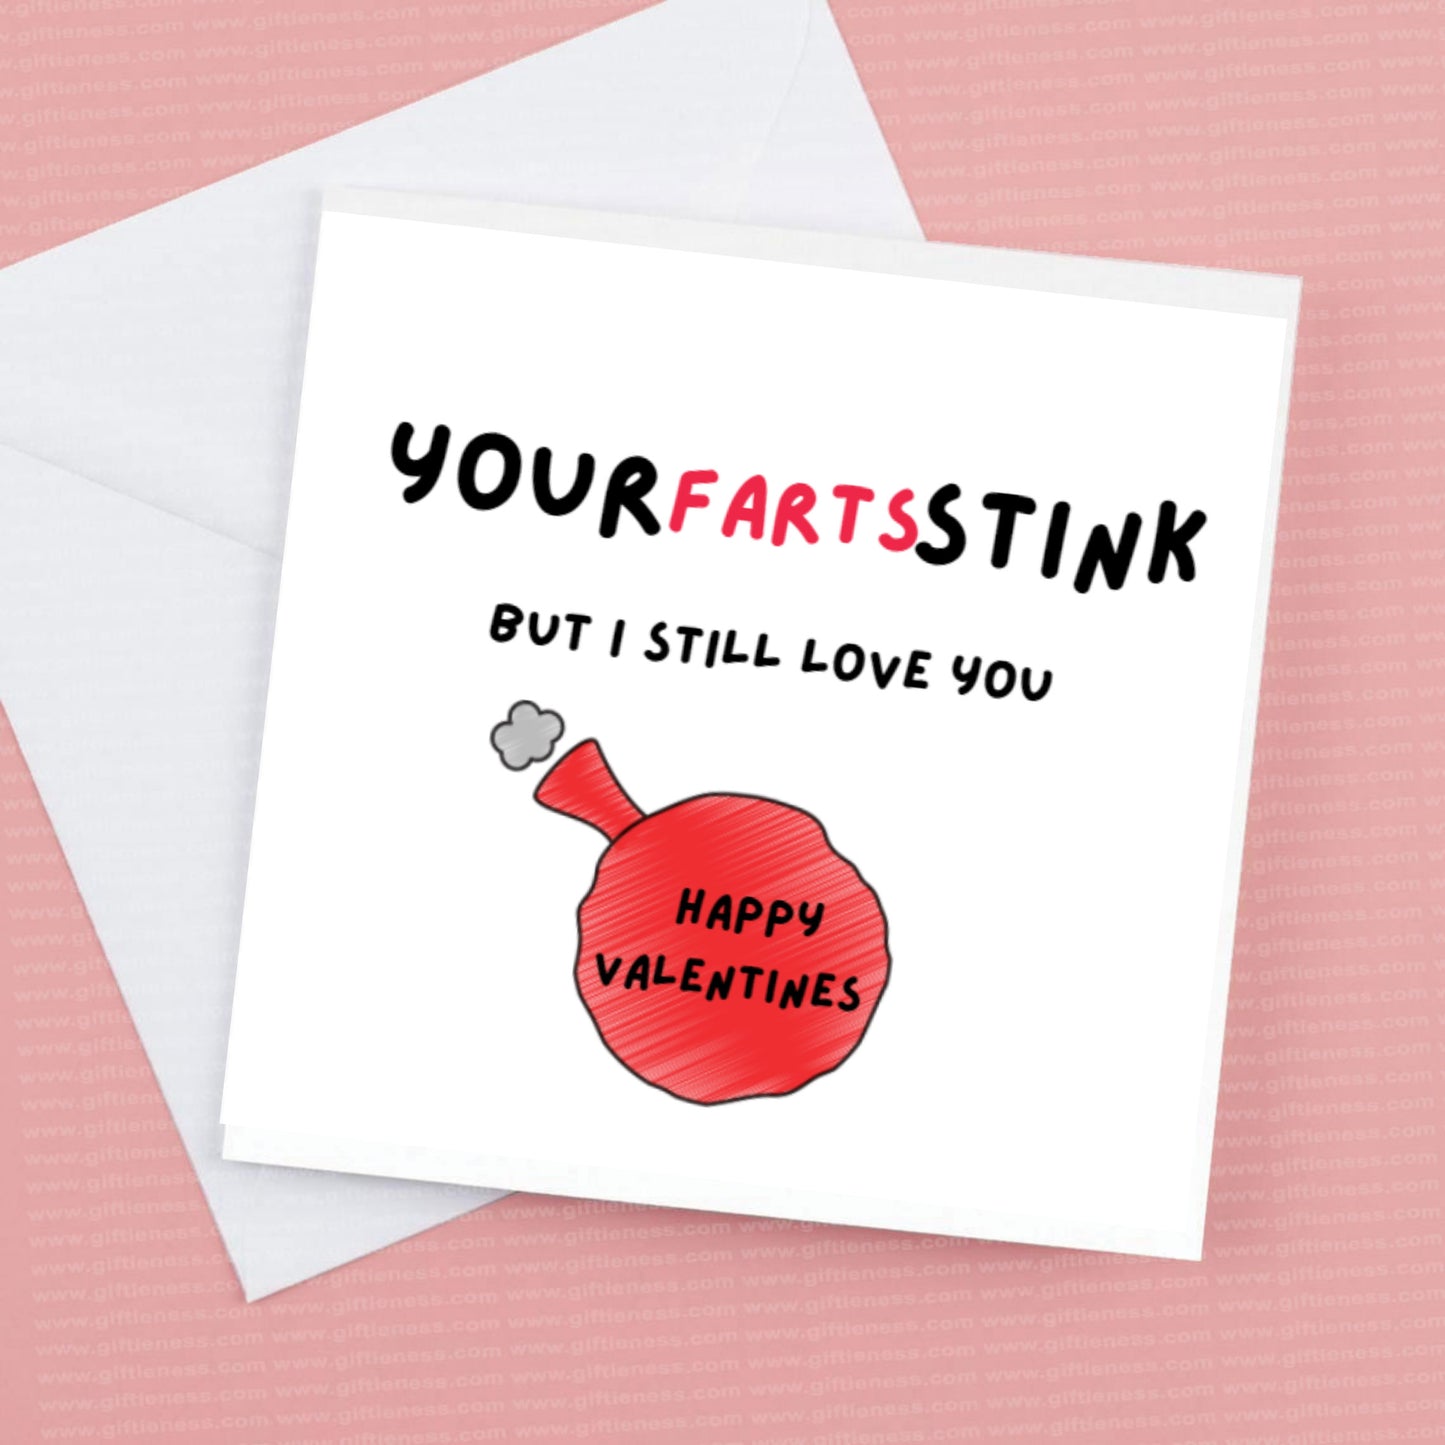 Your Farts Stink but I still love you